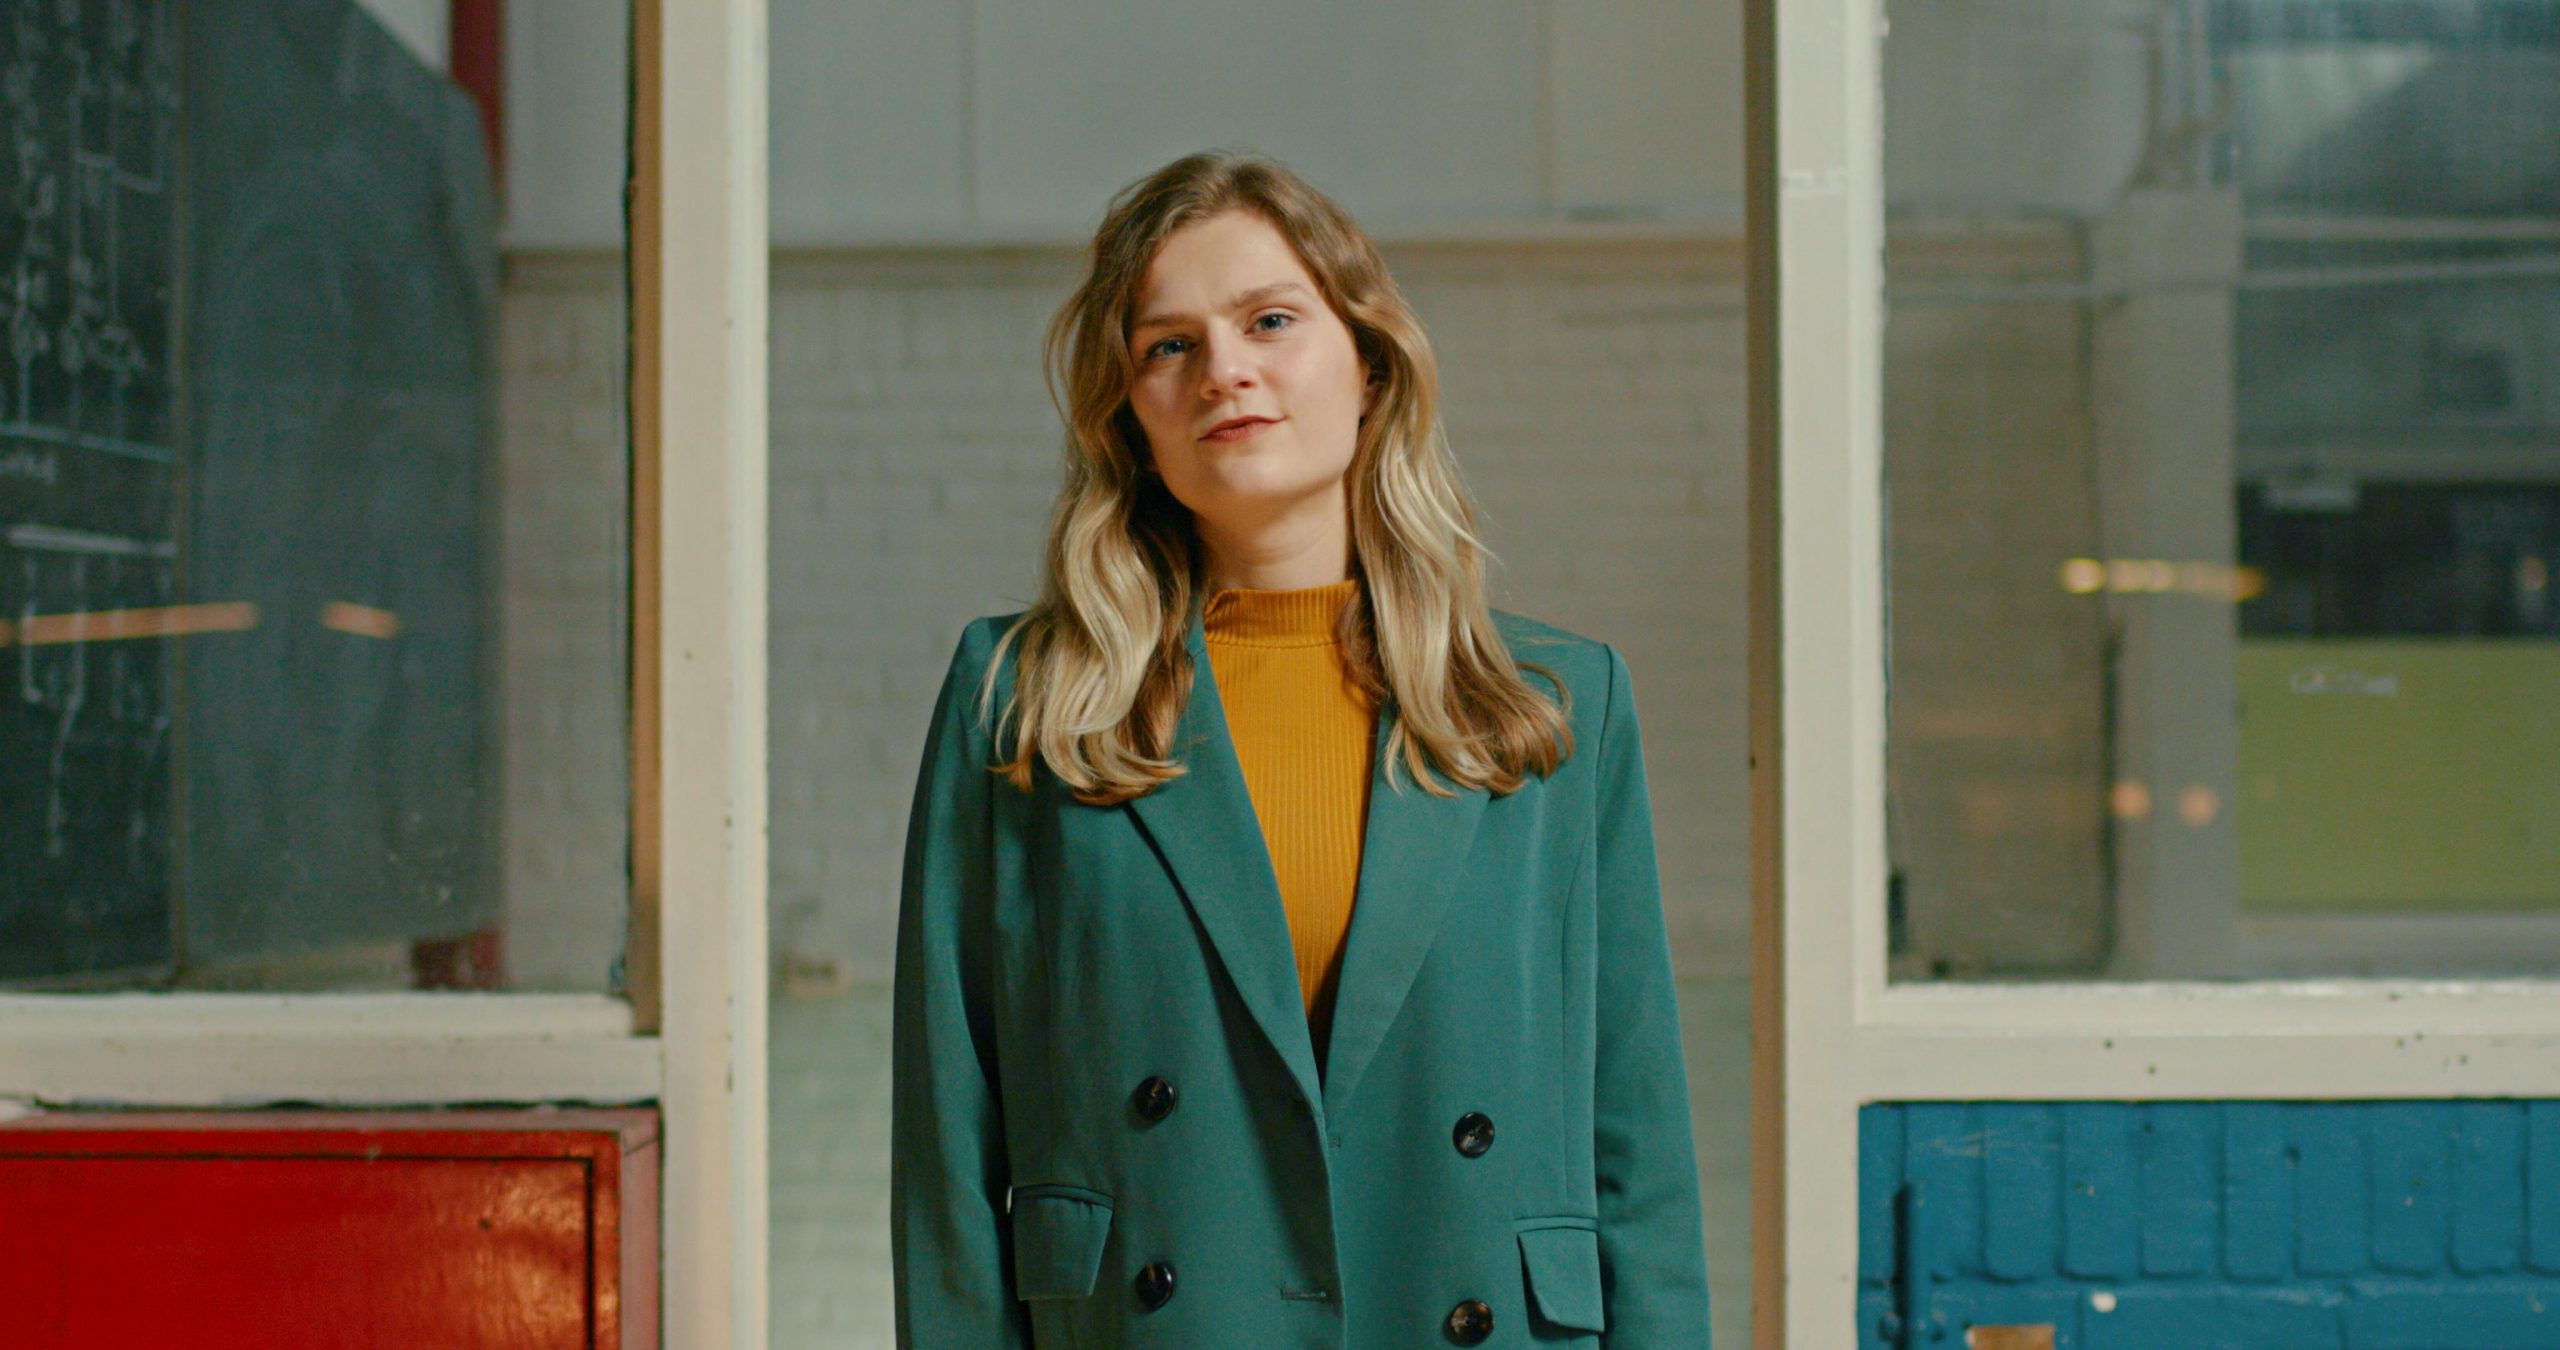 Still from Momentum. A medium of Carline standing in front of a doorway in what looks like an abandoned school. She's wearing a yellow top and a blue blazer, and she's staring powerfully into the camera.